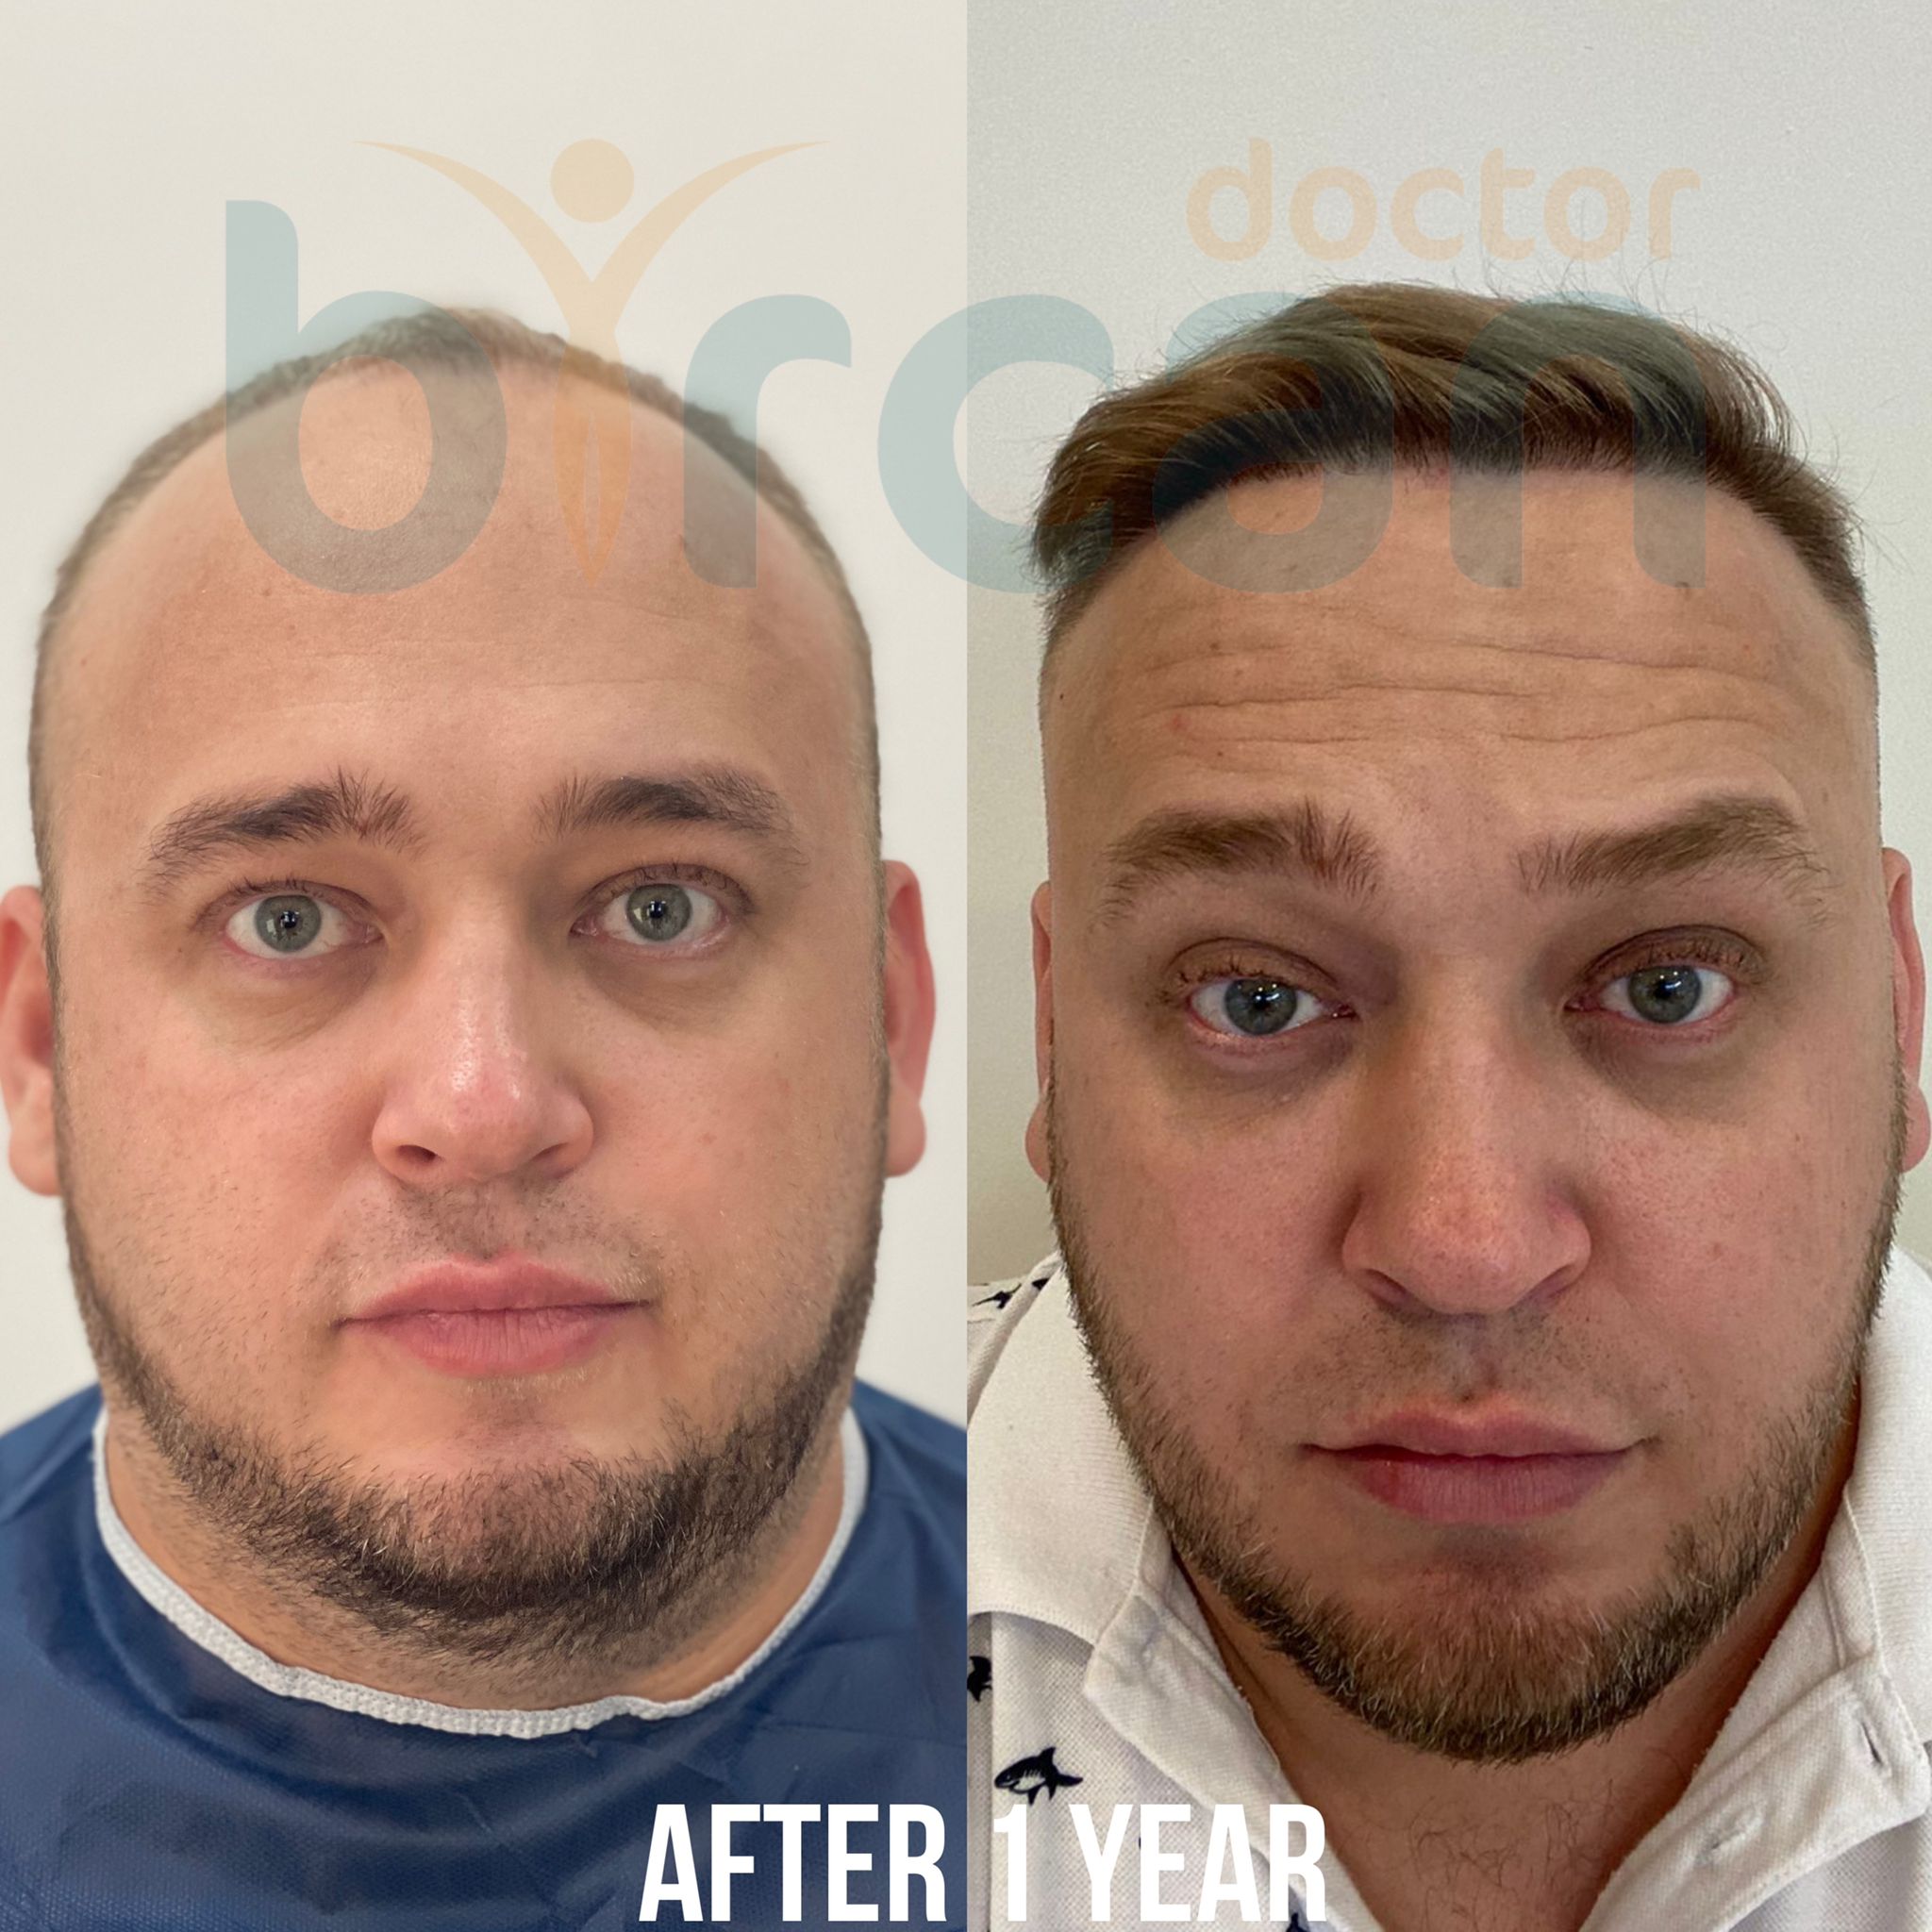 doctor-bircan-customer-before-after-photo